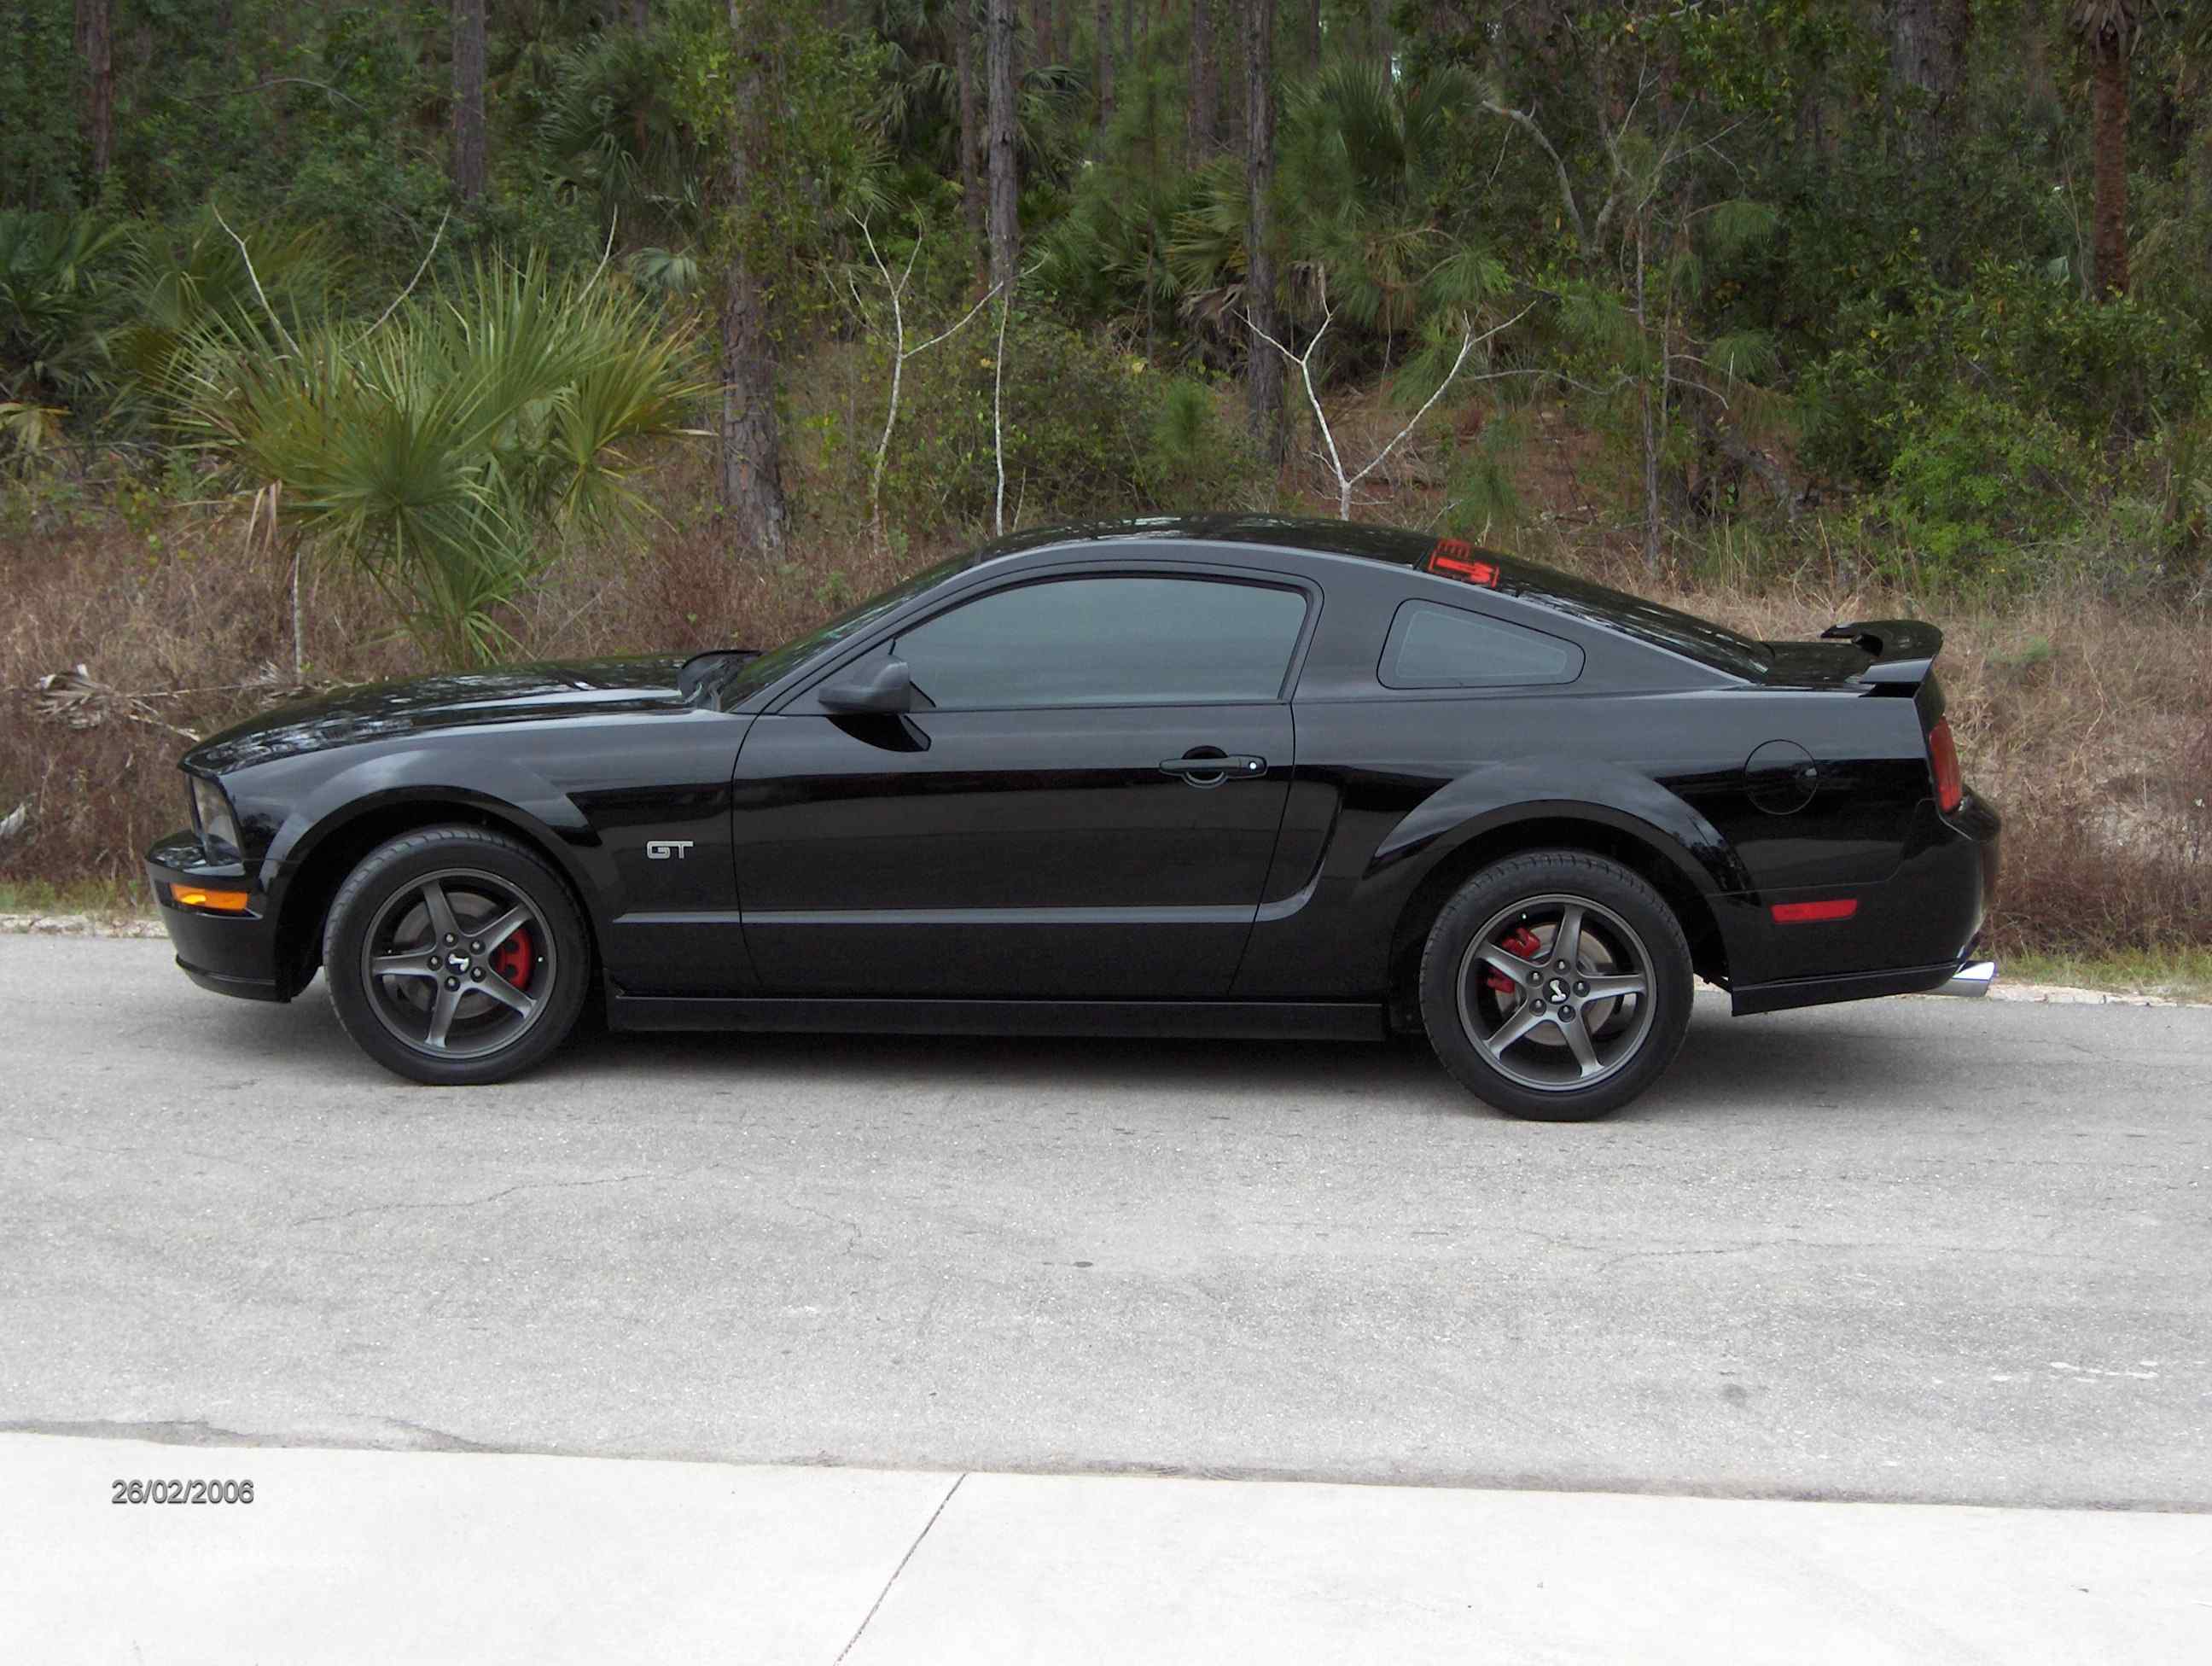 2005 Ford mustang gt 0-60 #4